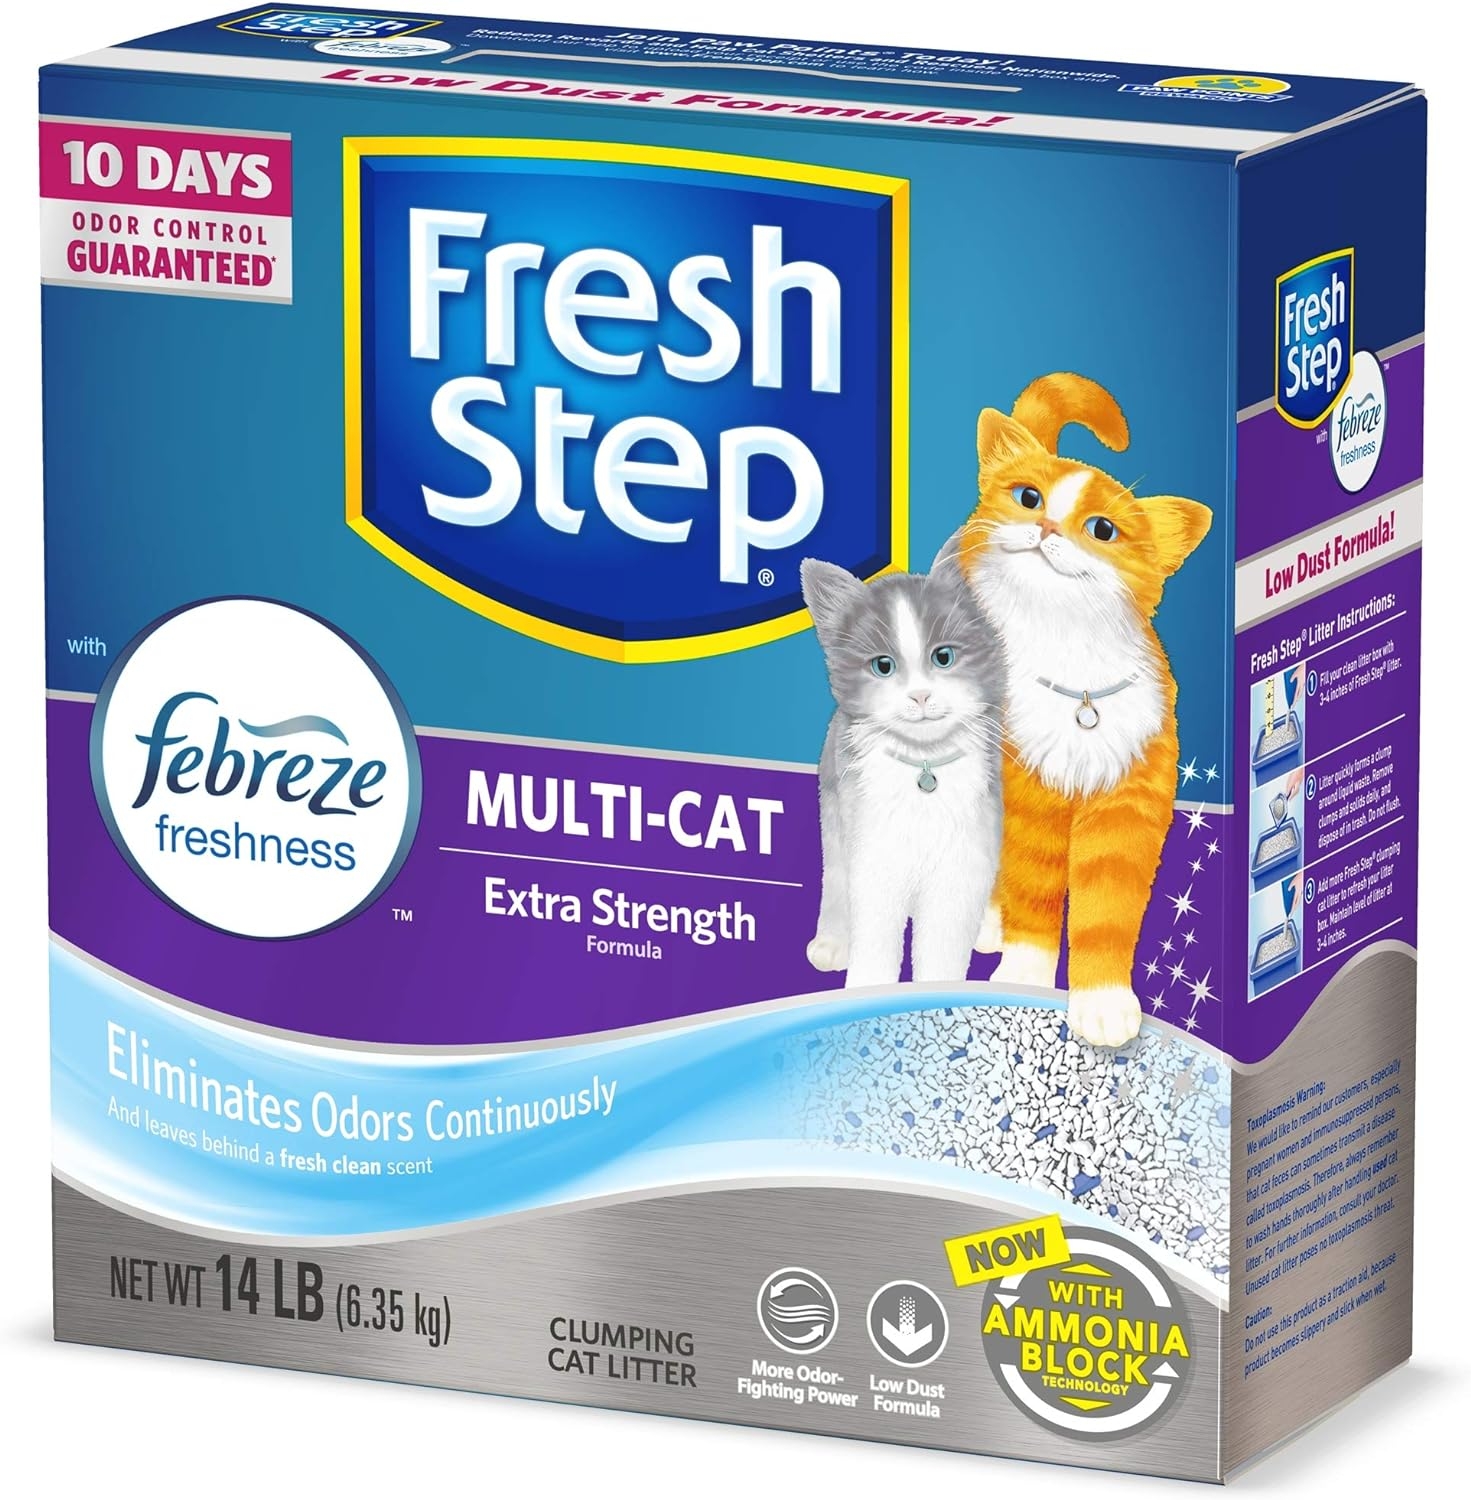 Fresh Step Multi-Cat with Febreze Freshness, Clumping Cat Litter, Scented